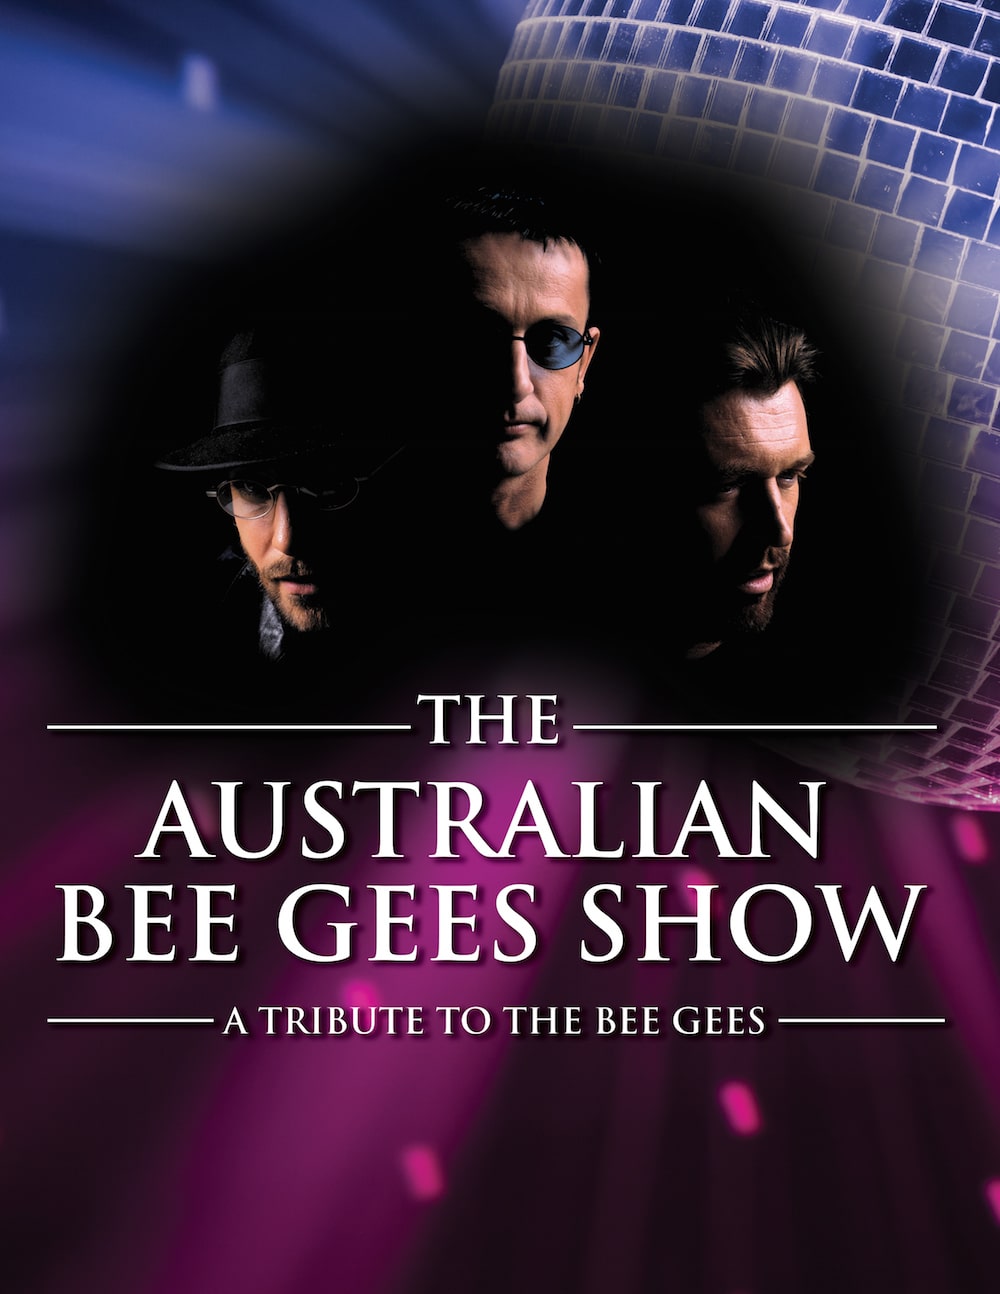 The Australian Bee Gees Show comes to Nantucket for Pops